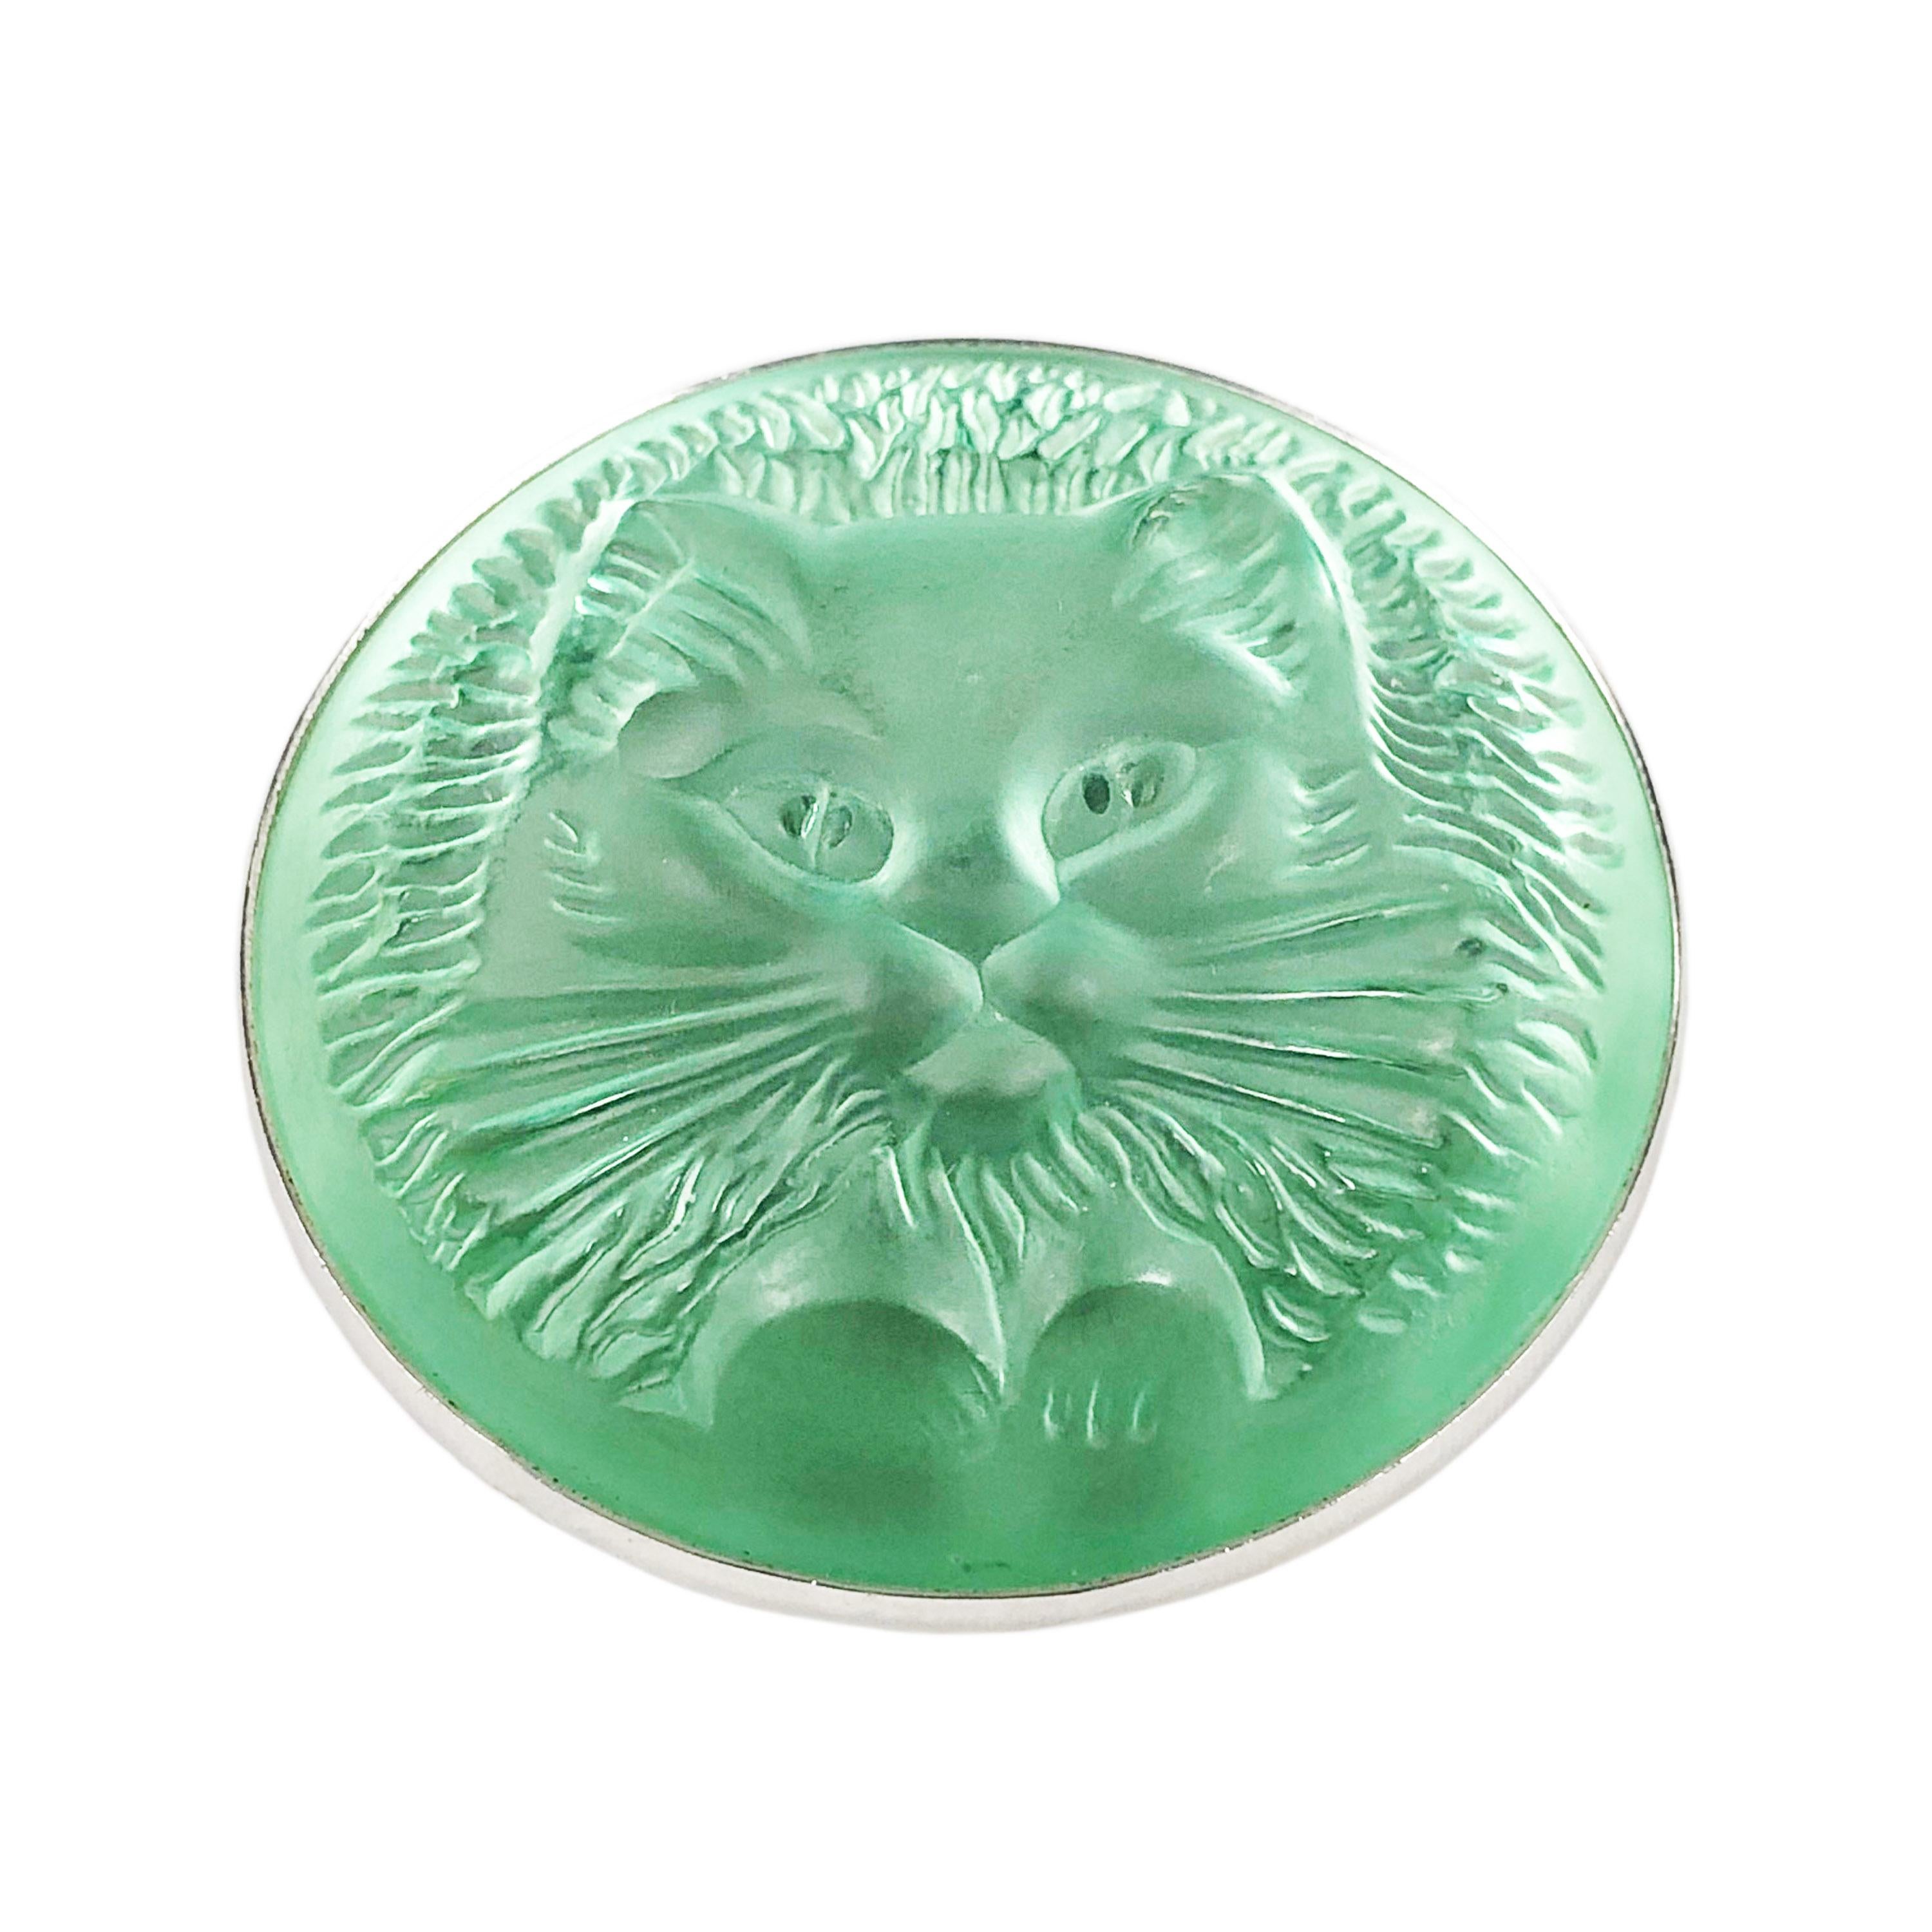 Circa 1990s Lalique Paris Pussy Cat Brooch, Green Frosted Glass Mounted in a White Metal Frame, measuring 1 3/4 inches in diameter., Comes in original Lalique Gift Box. 